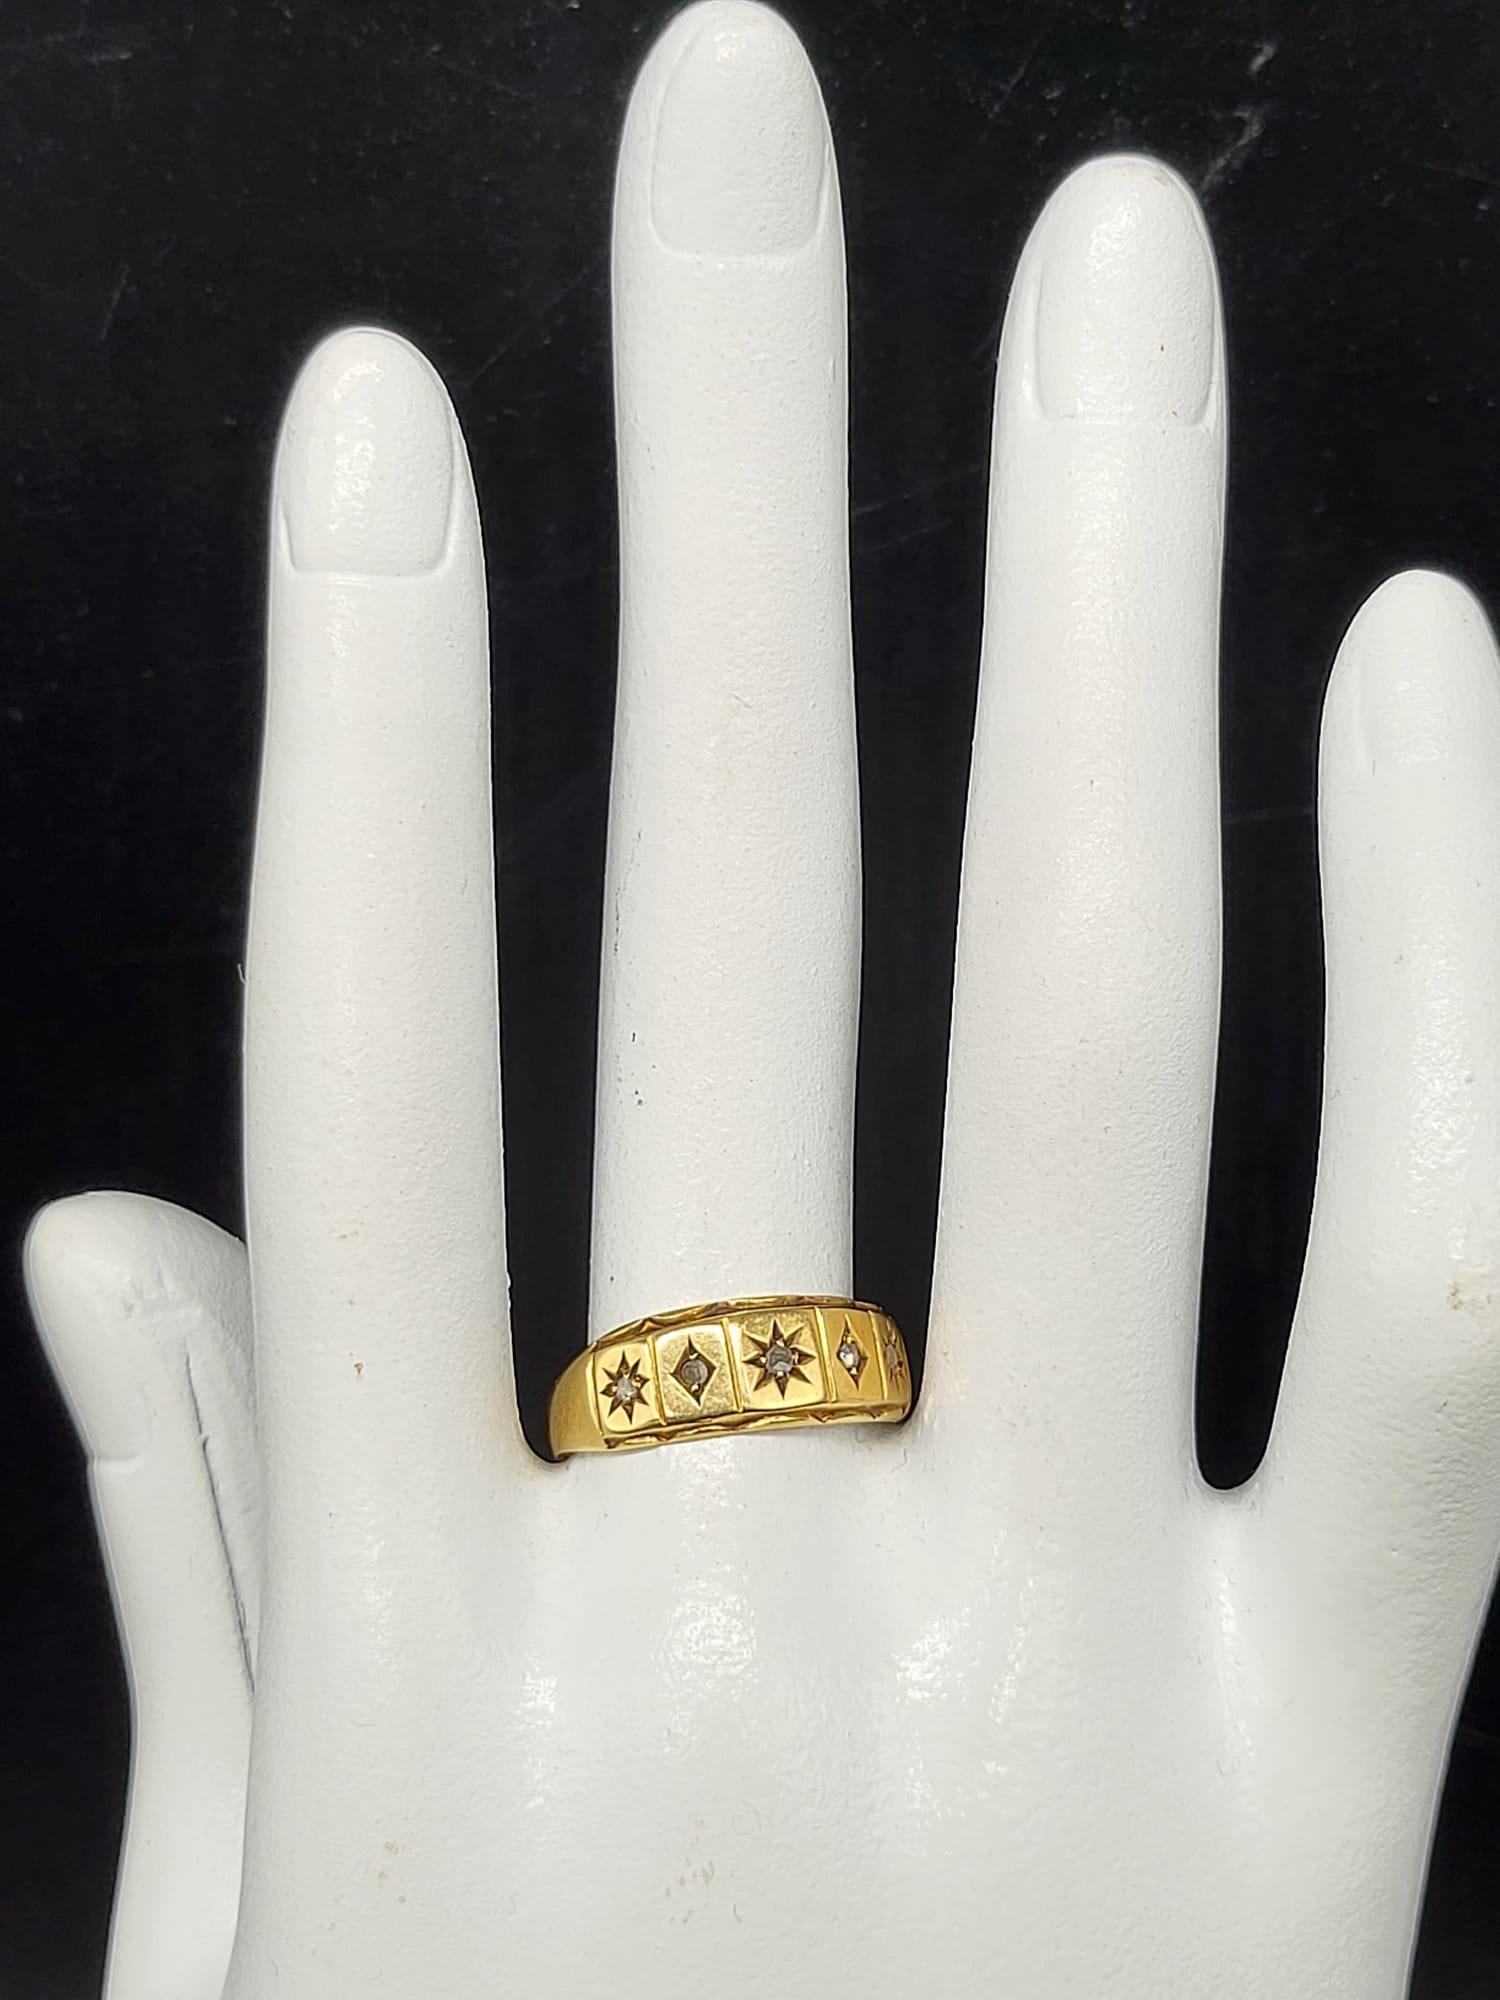 A 15 K yellow gold ring with five diamonds on top. Ring size: Q, weight: 1.9 g. - Image 6 of 6